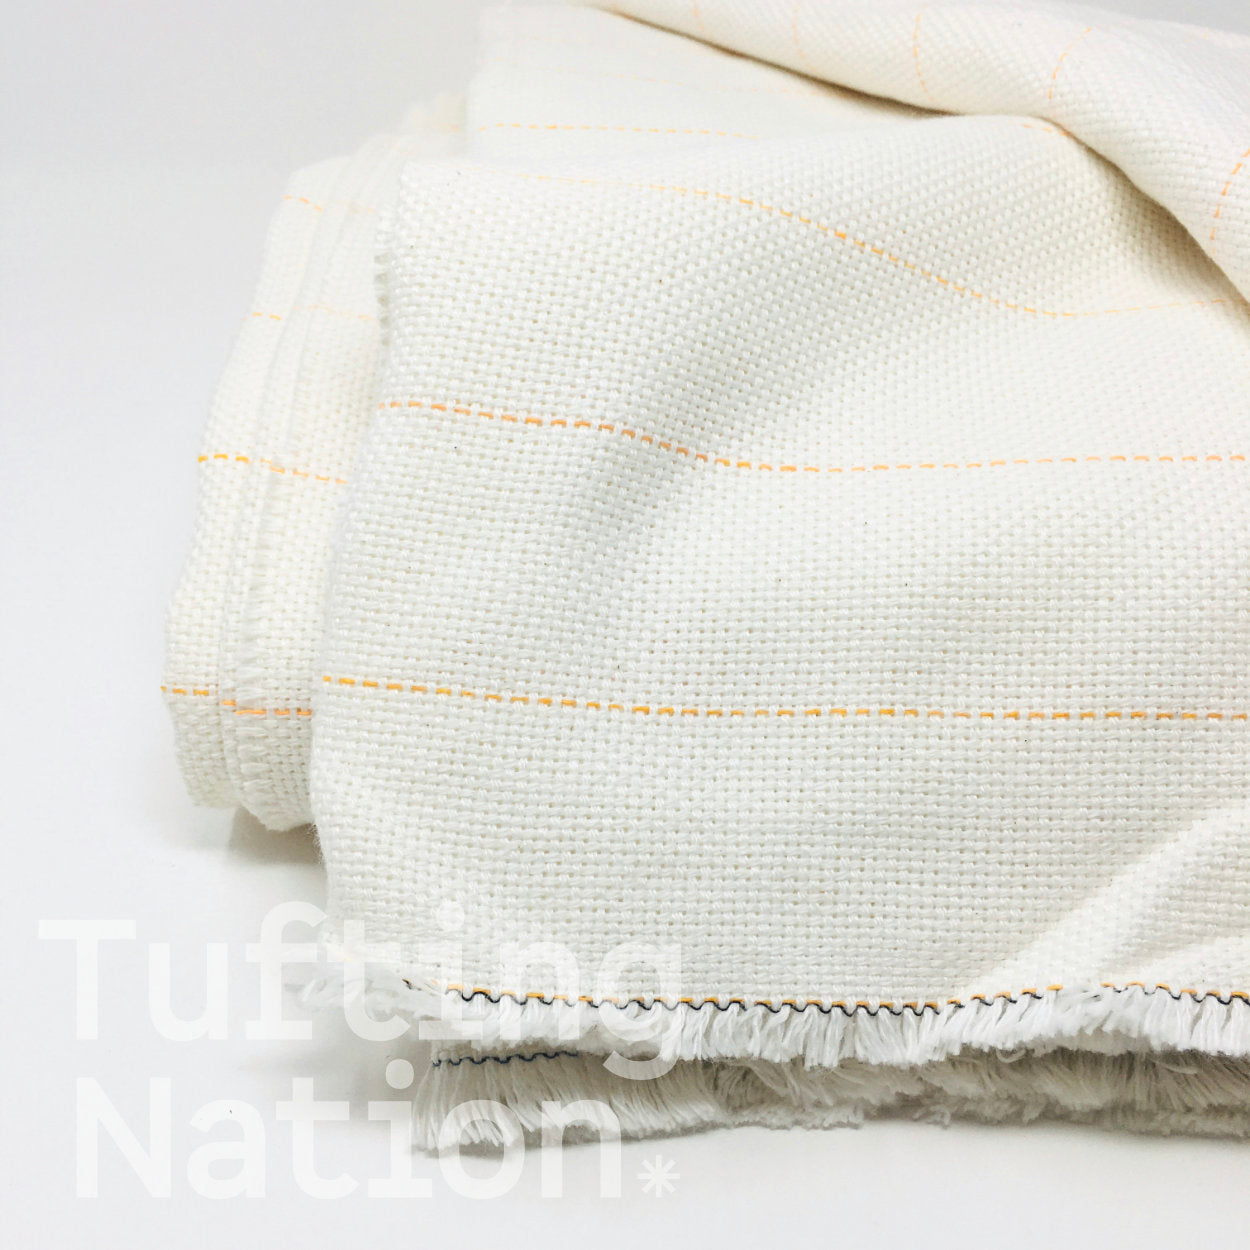 Primary Tufting Cloth White